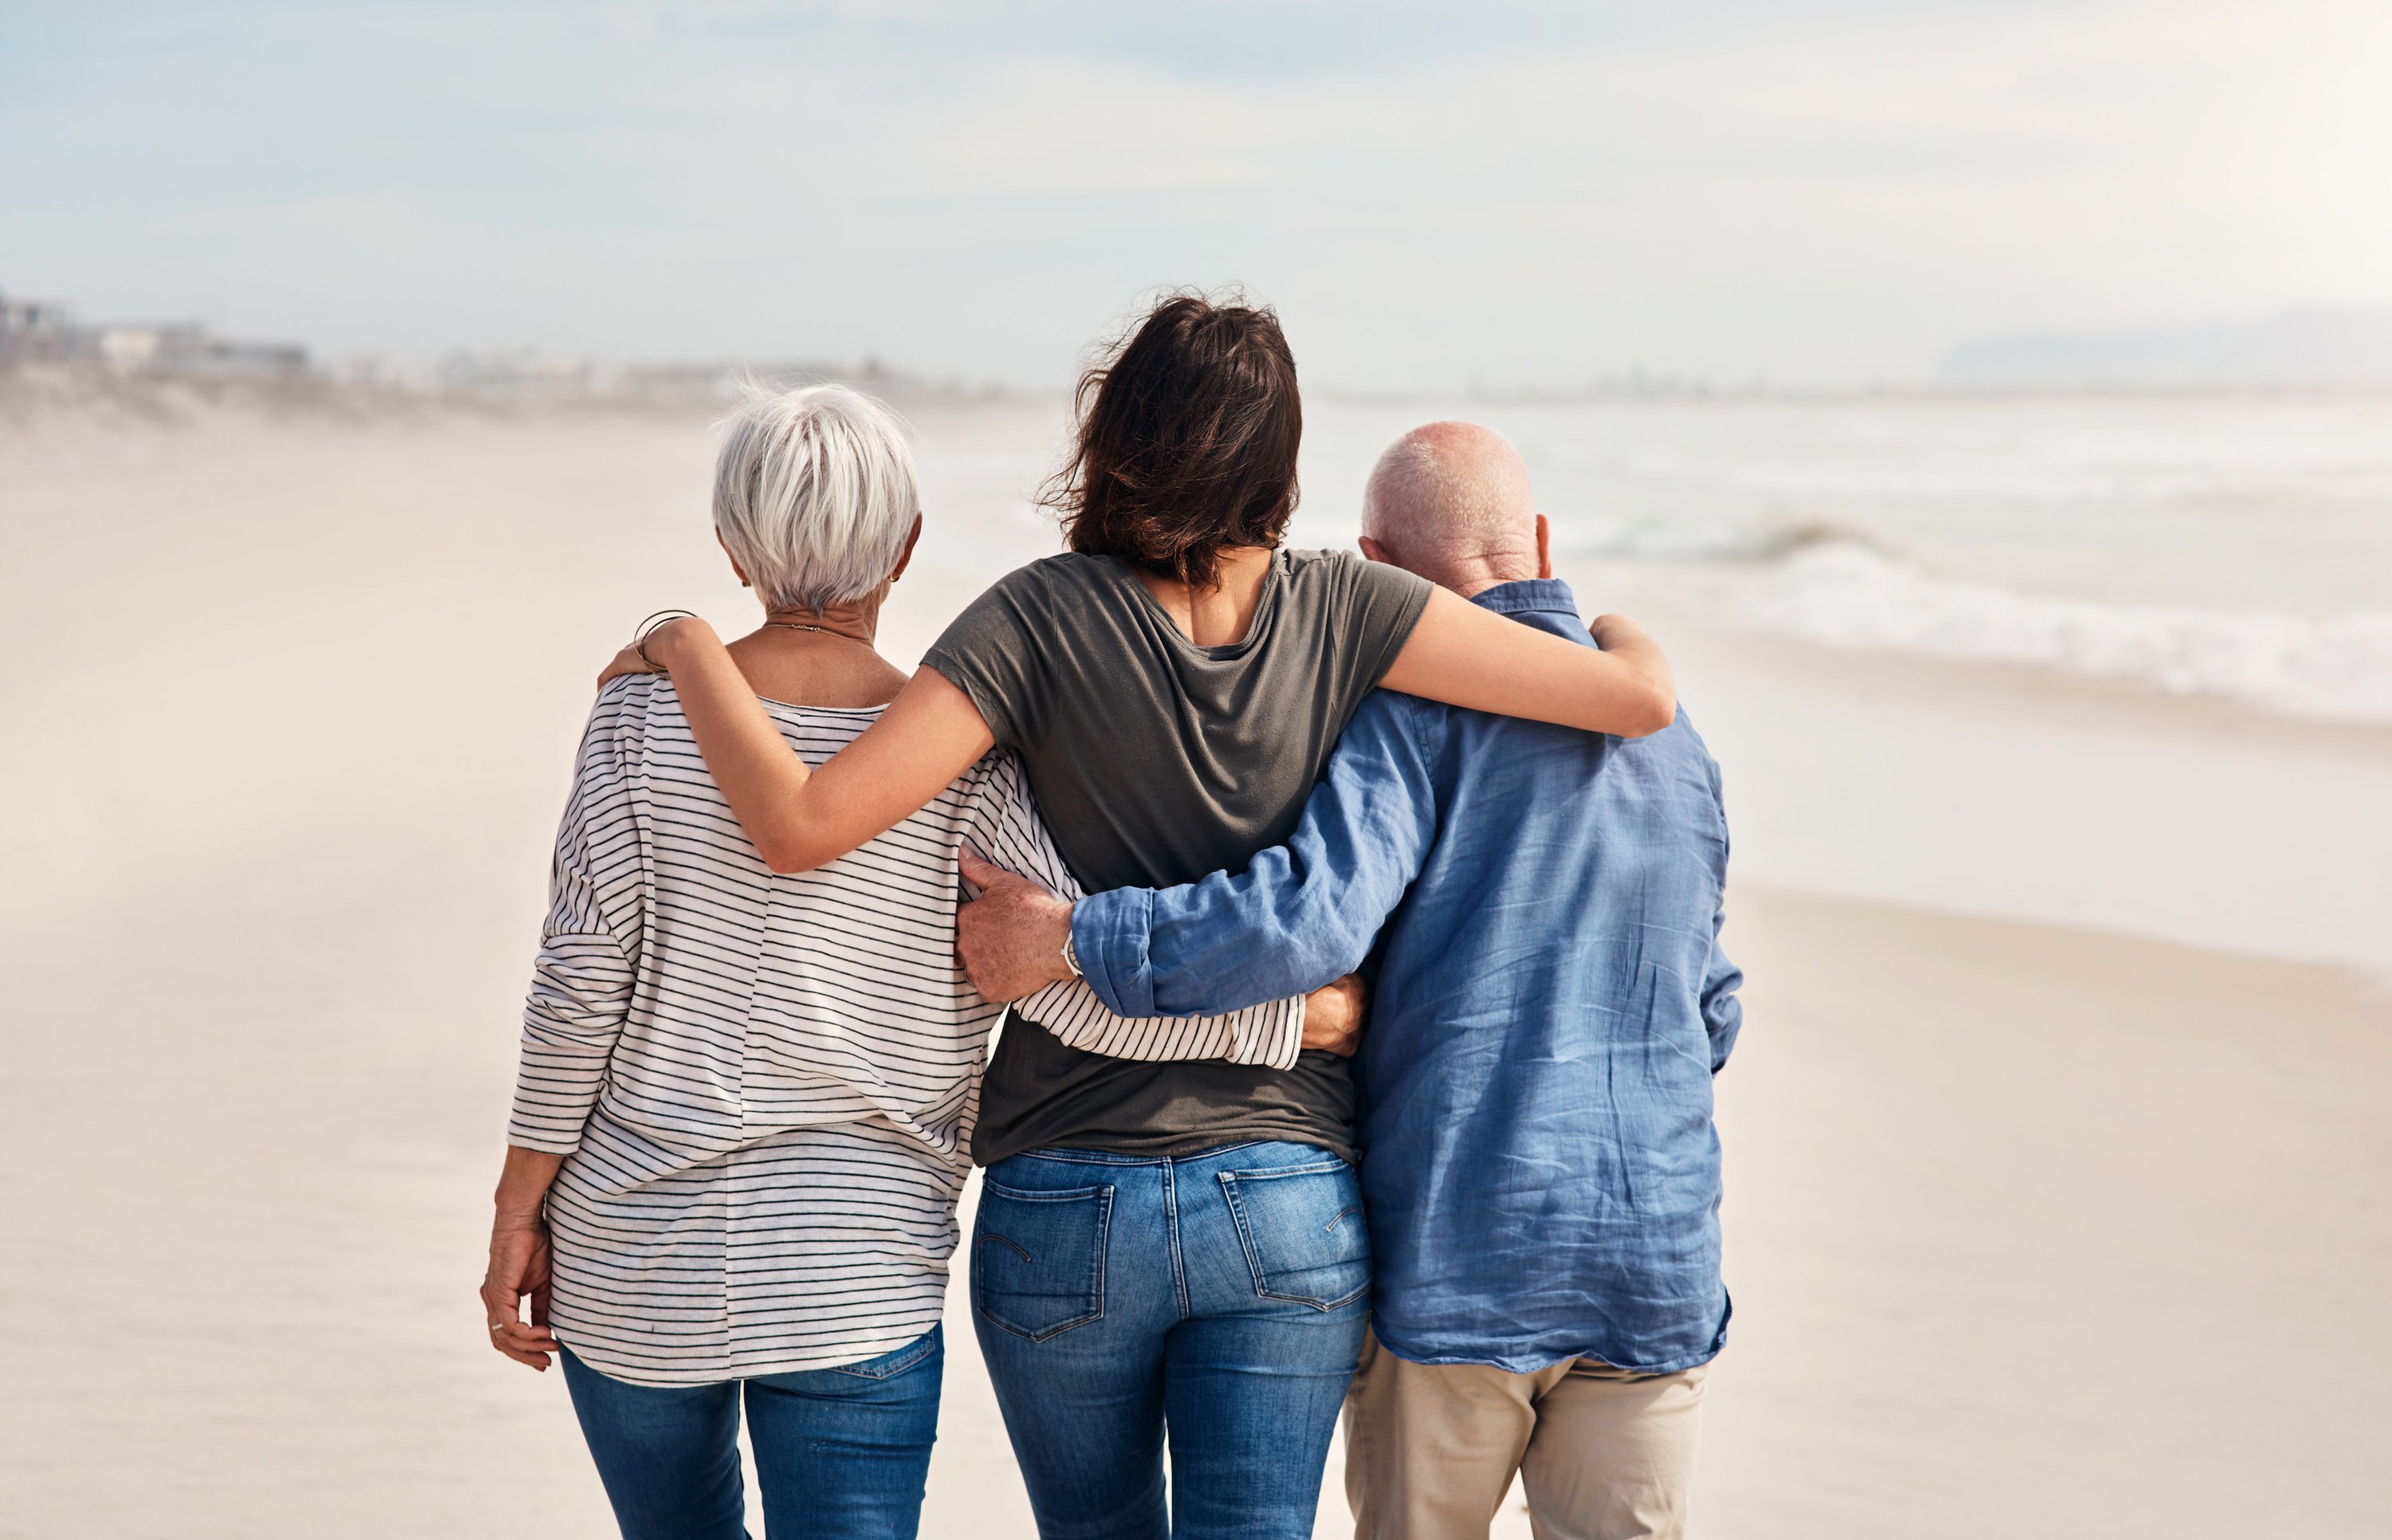 A woman walks on the beach with her parents by her side